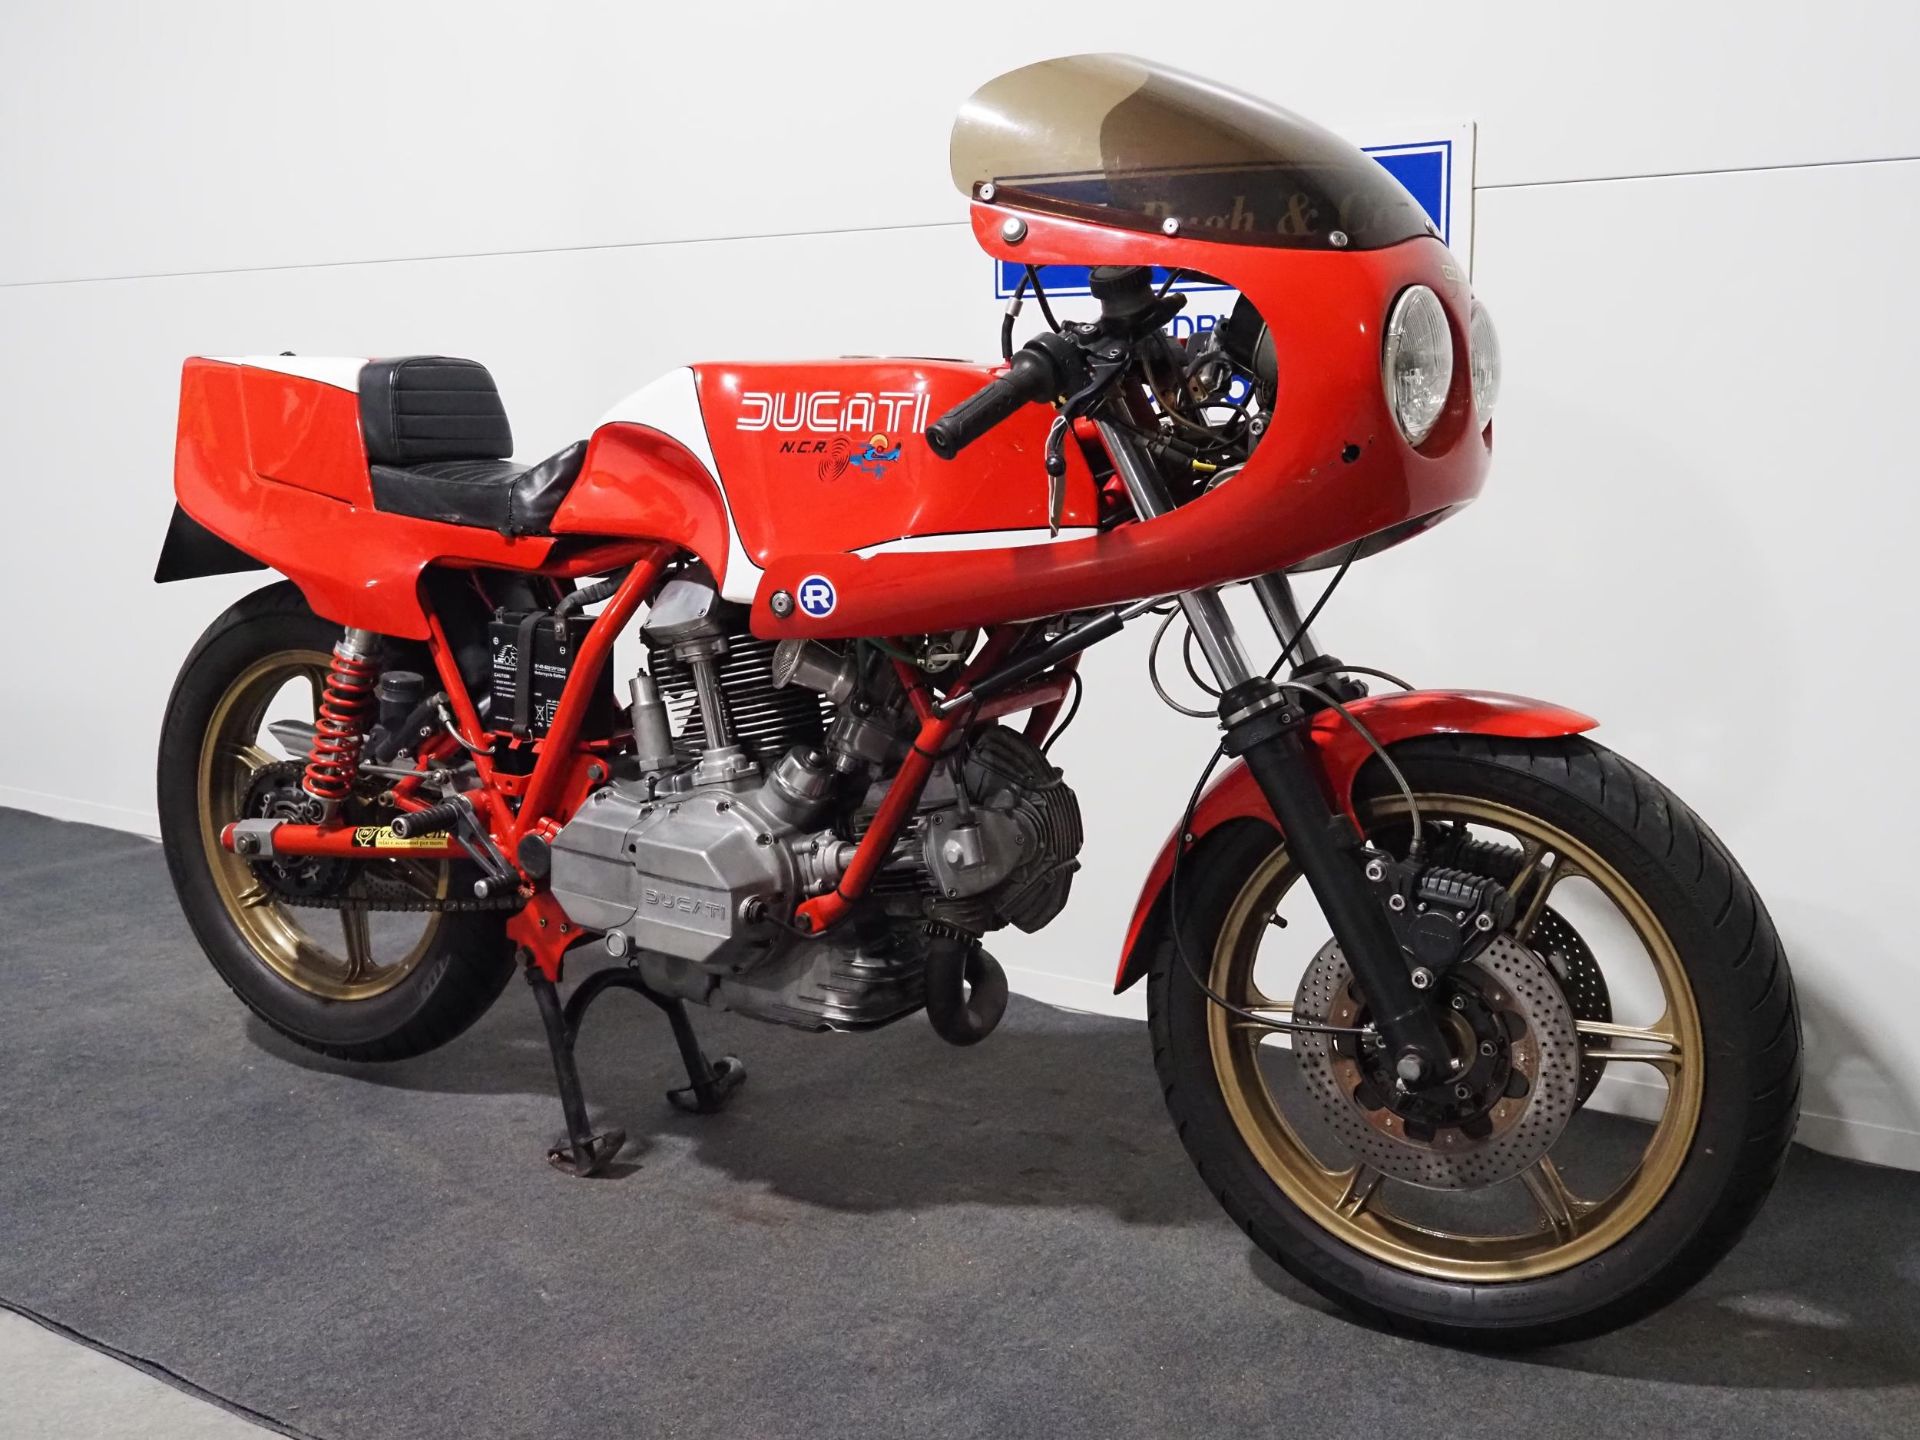 Ducati Darmah motorcycle. 1982. 900cc. Frame No. 952313. Engine No. 906036. Marzocchi forks. 40mm - Image 2 of 5